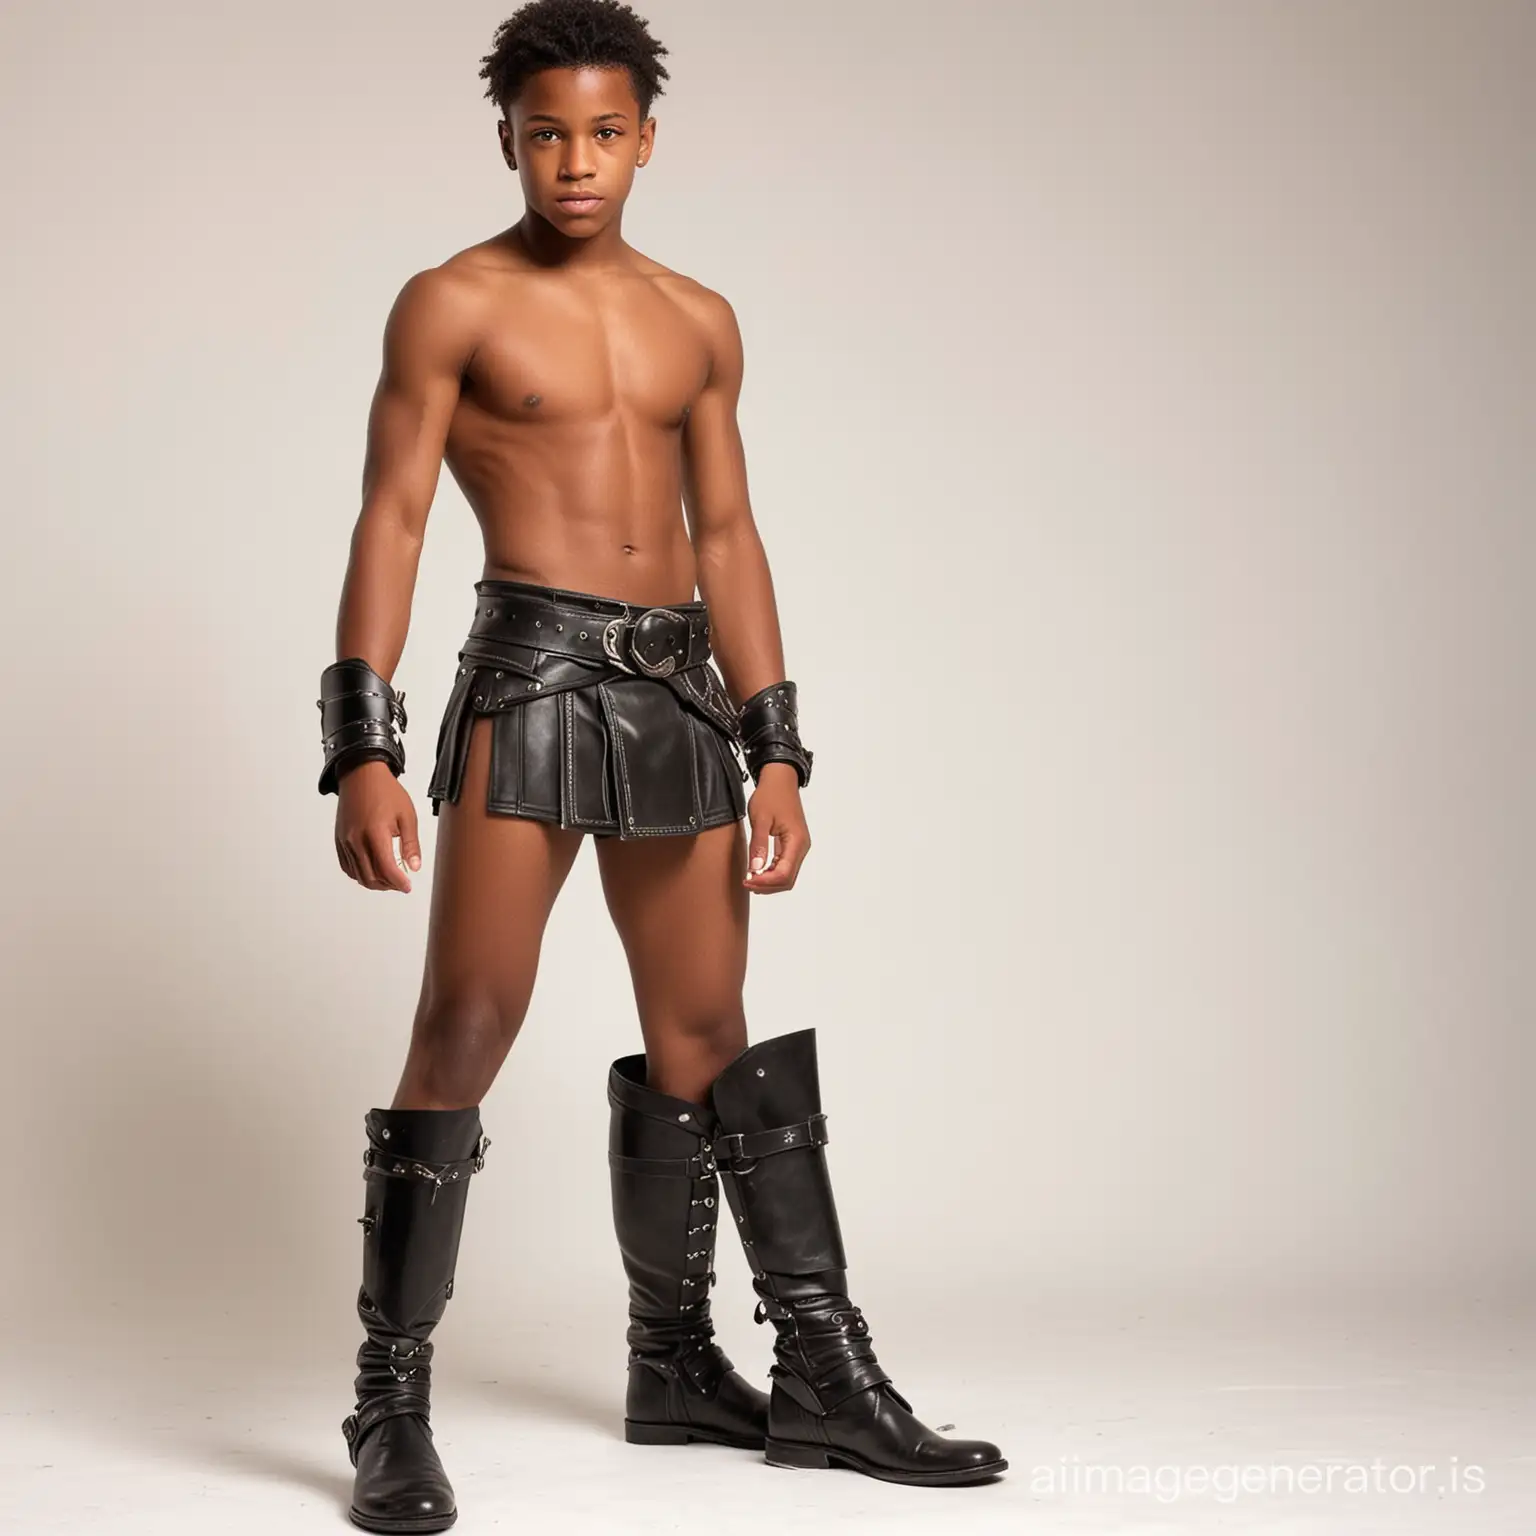 Muscular-Teenage-Boy-Warrior-in-Loincloth-and-Boots-on-White-Background